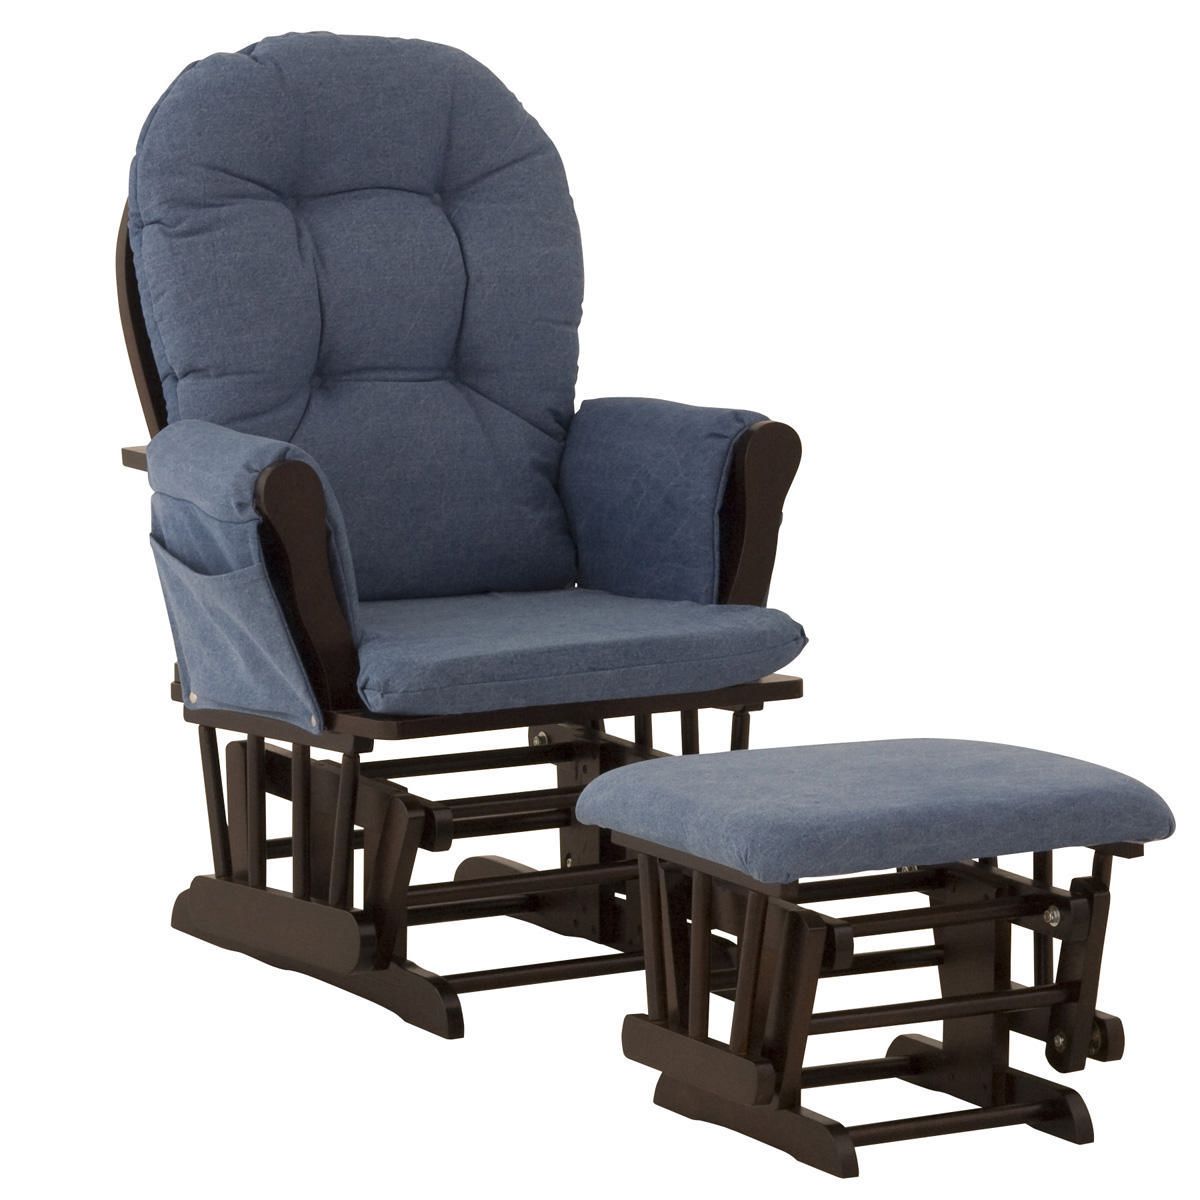 Glider Chair Walmart Canada Shop Clothing Shoes Online